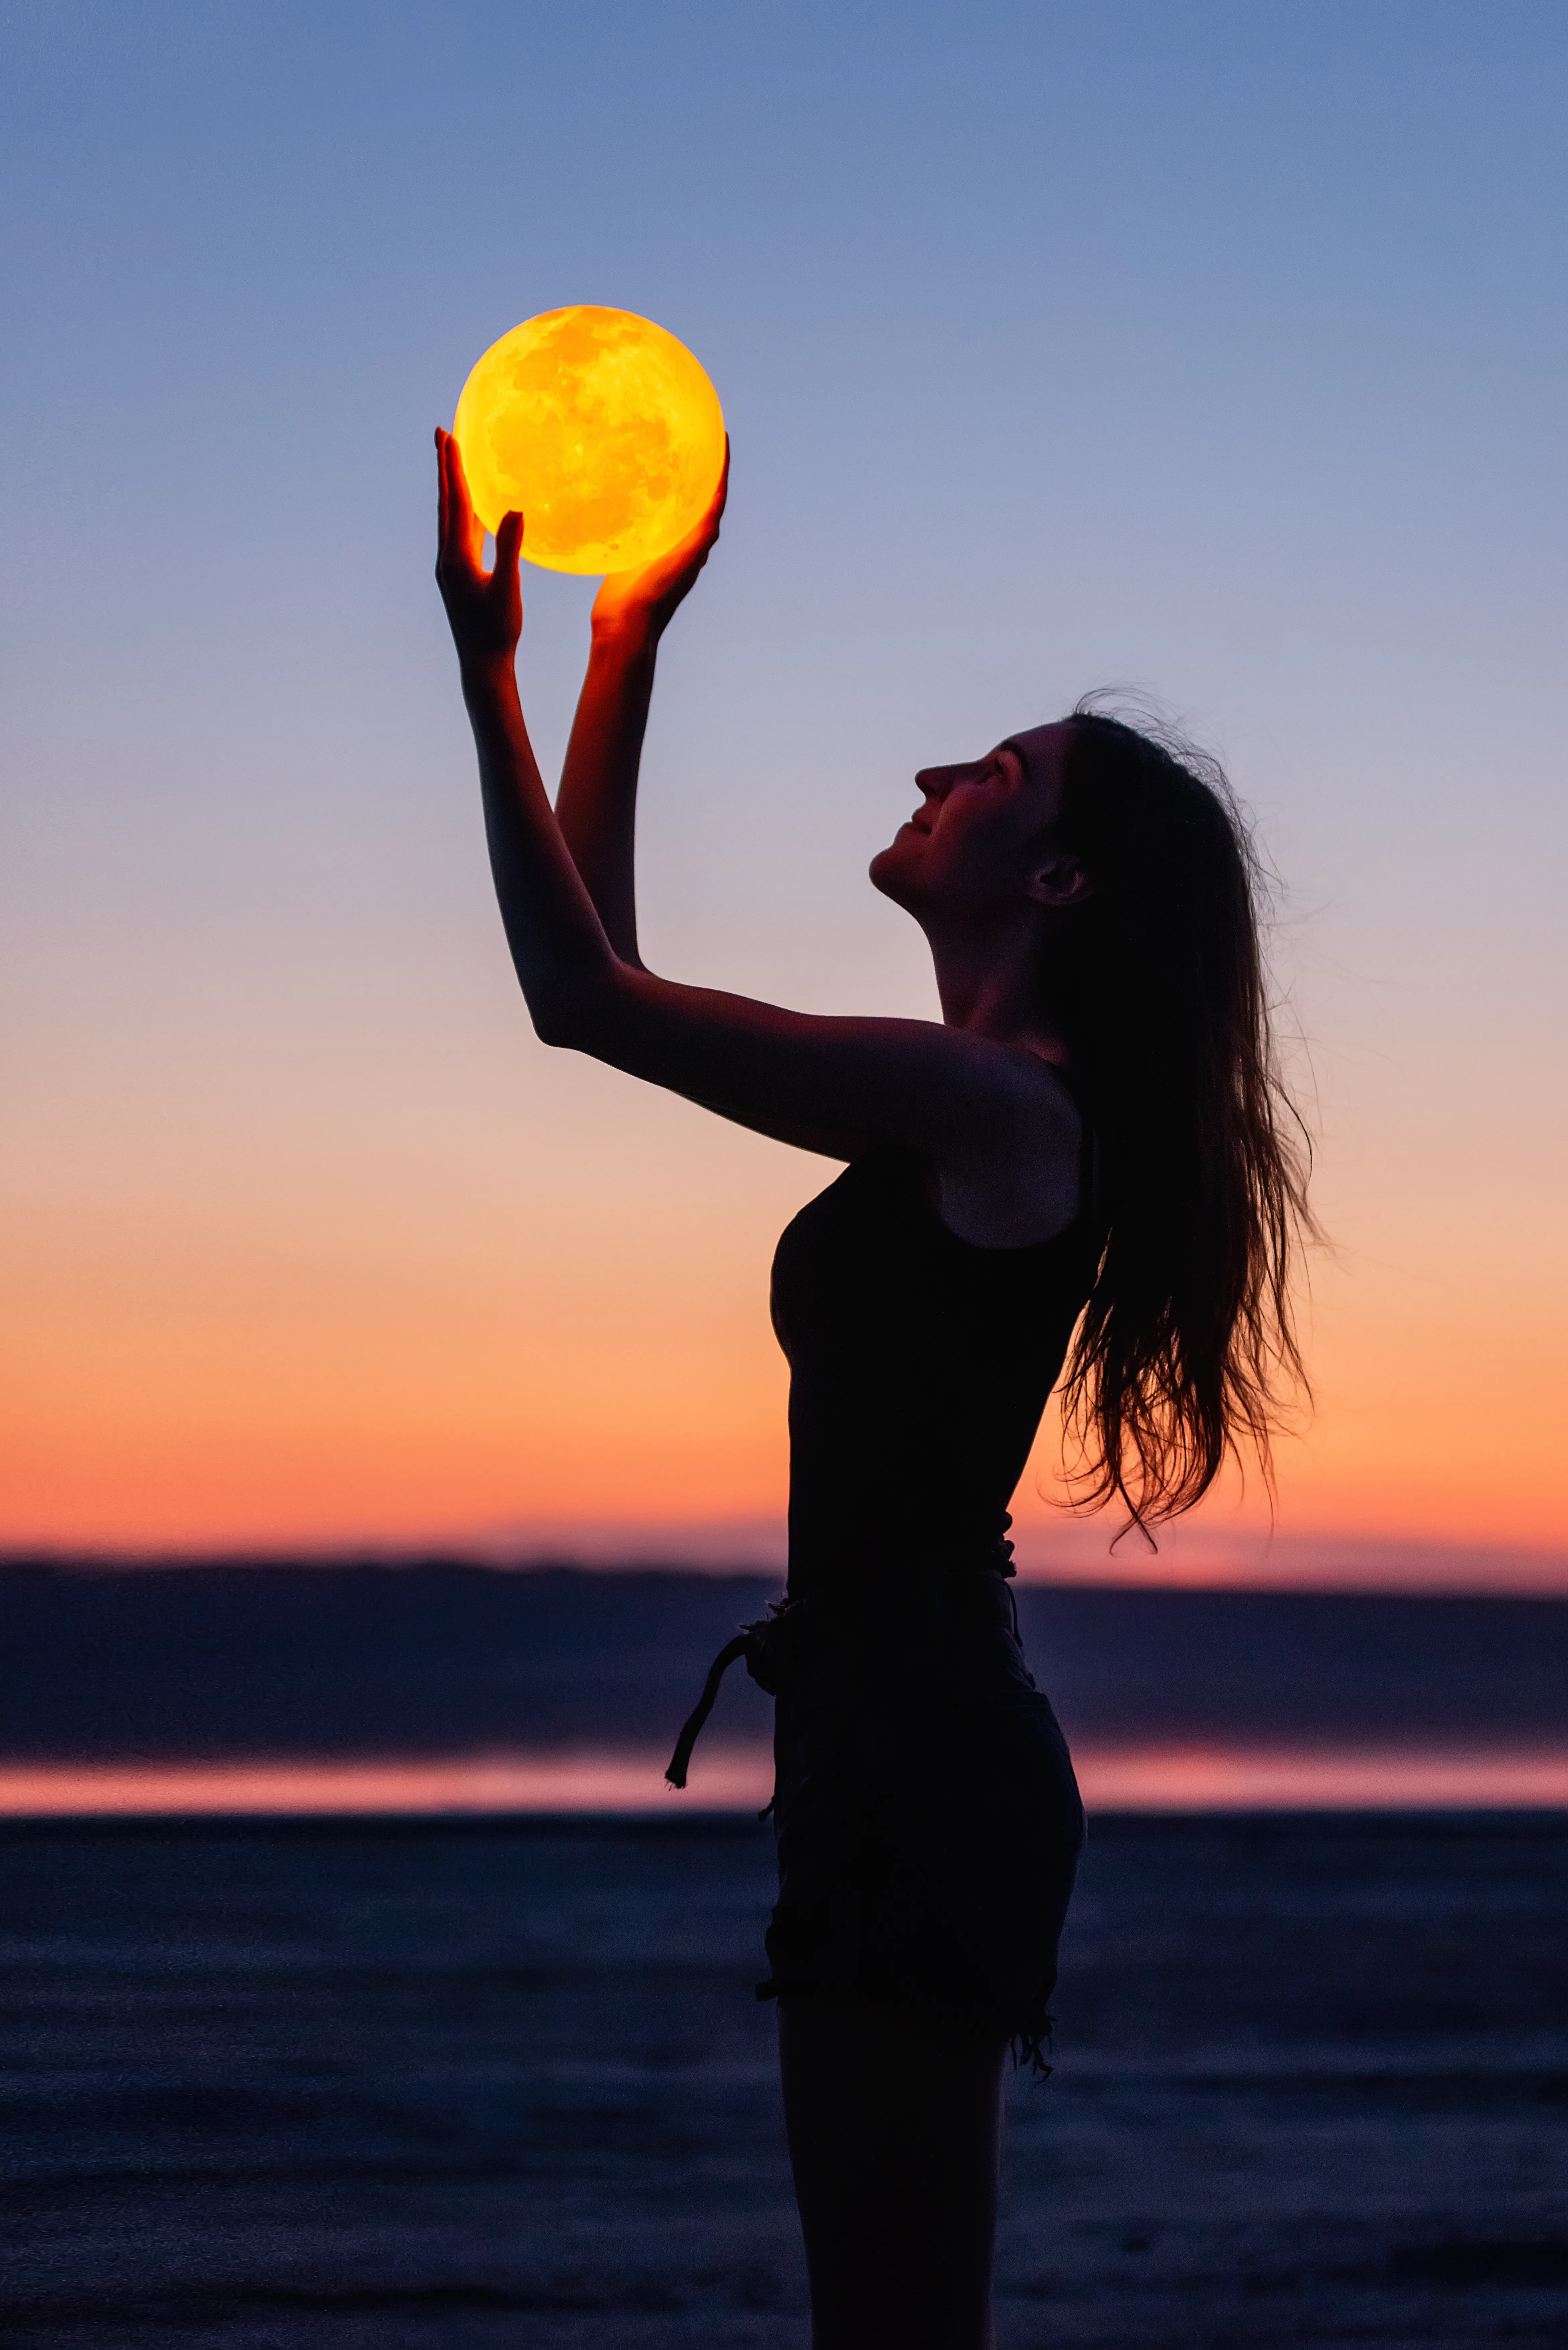 A young woman holds the full moon in her hands against the backdrop of a red sunset. Millennial blogger leads social media. Girl silhouette portrait. Astrology, Waxing Crescent. Copy space